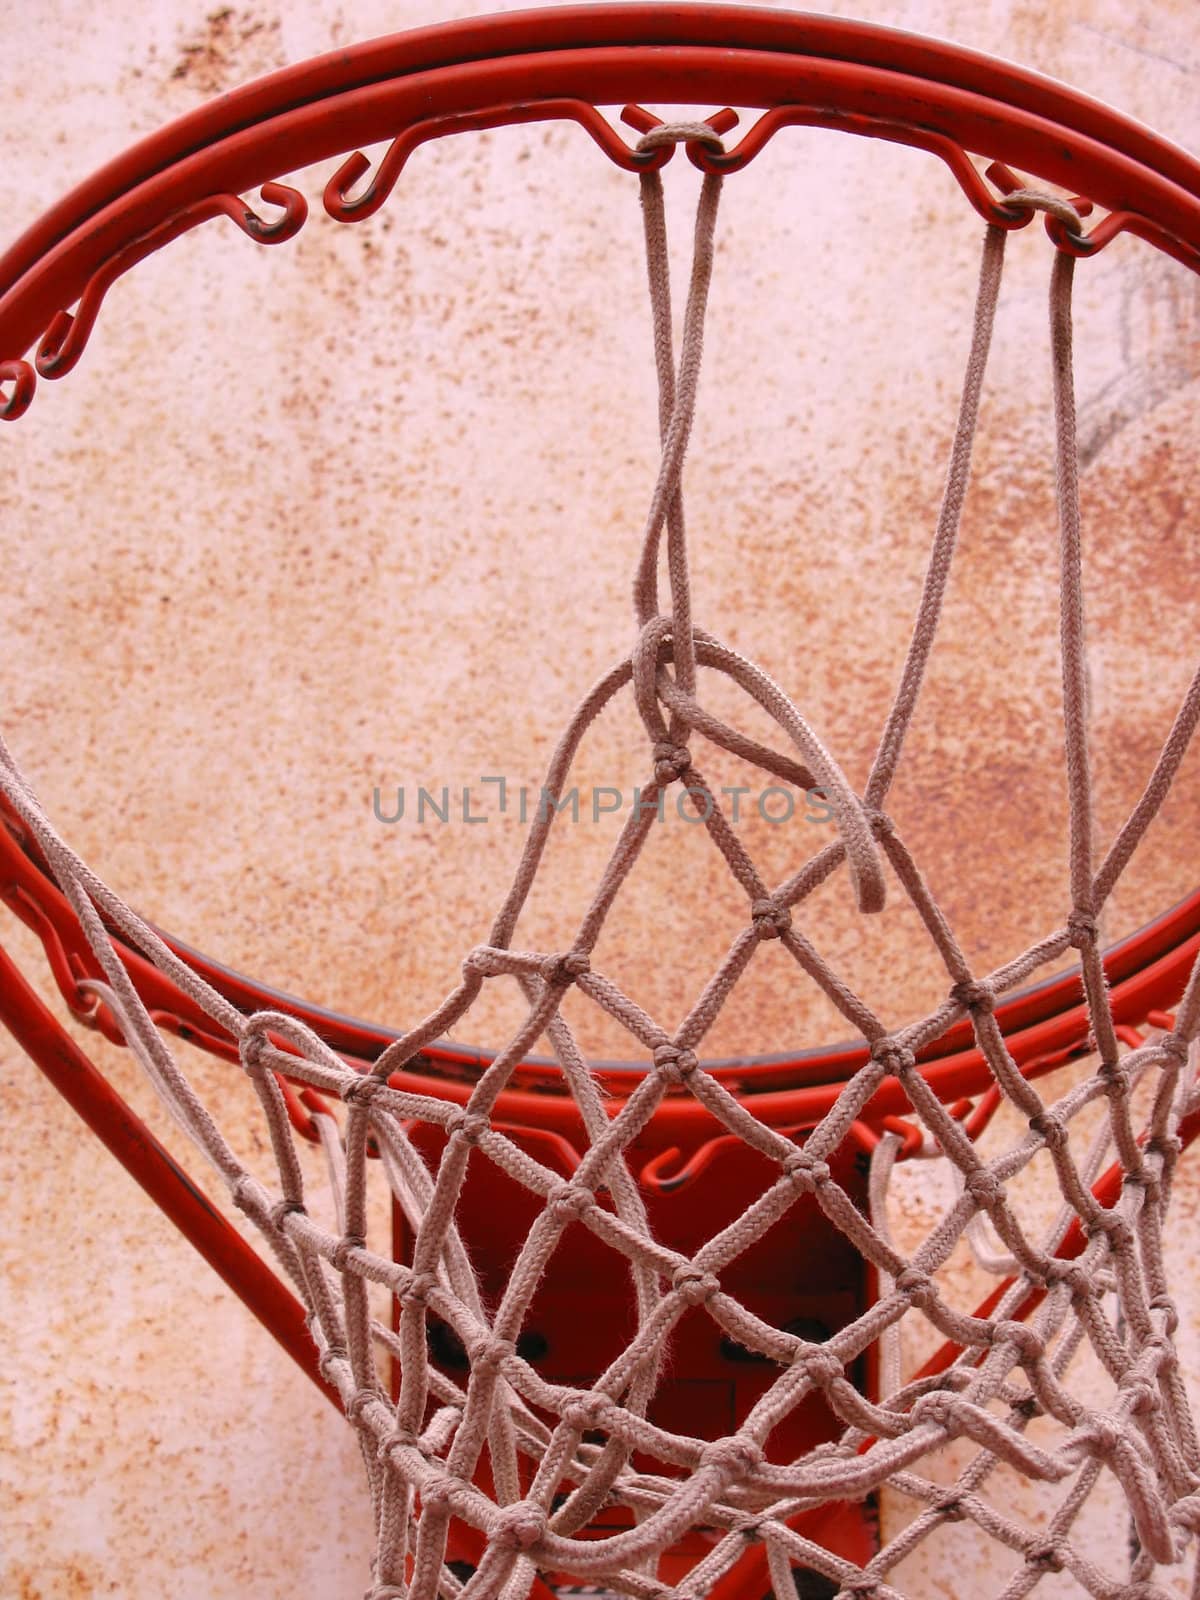 A closeup of a playground basketball goal and net.